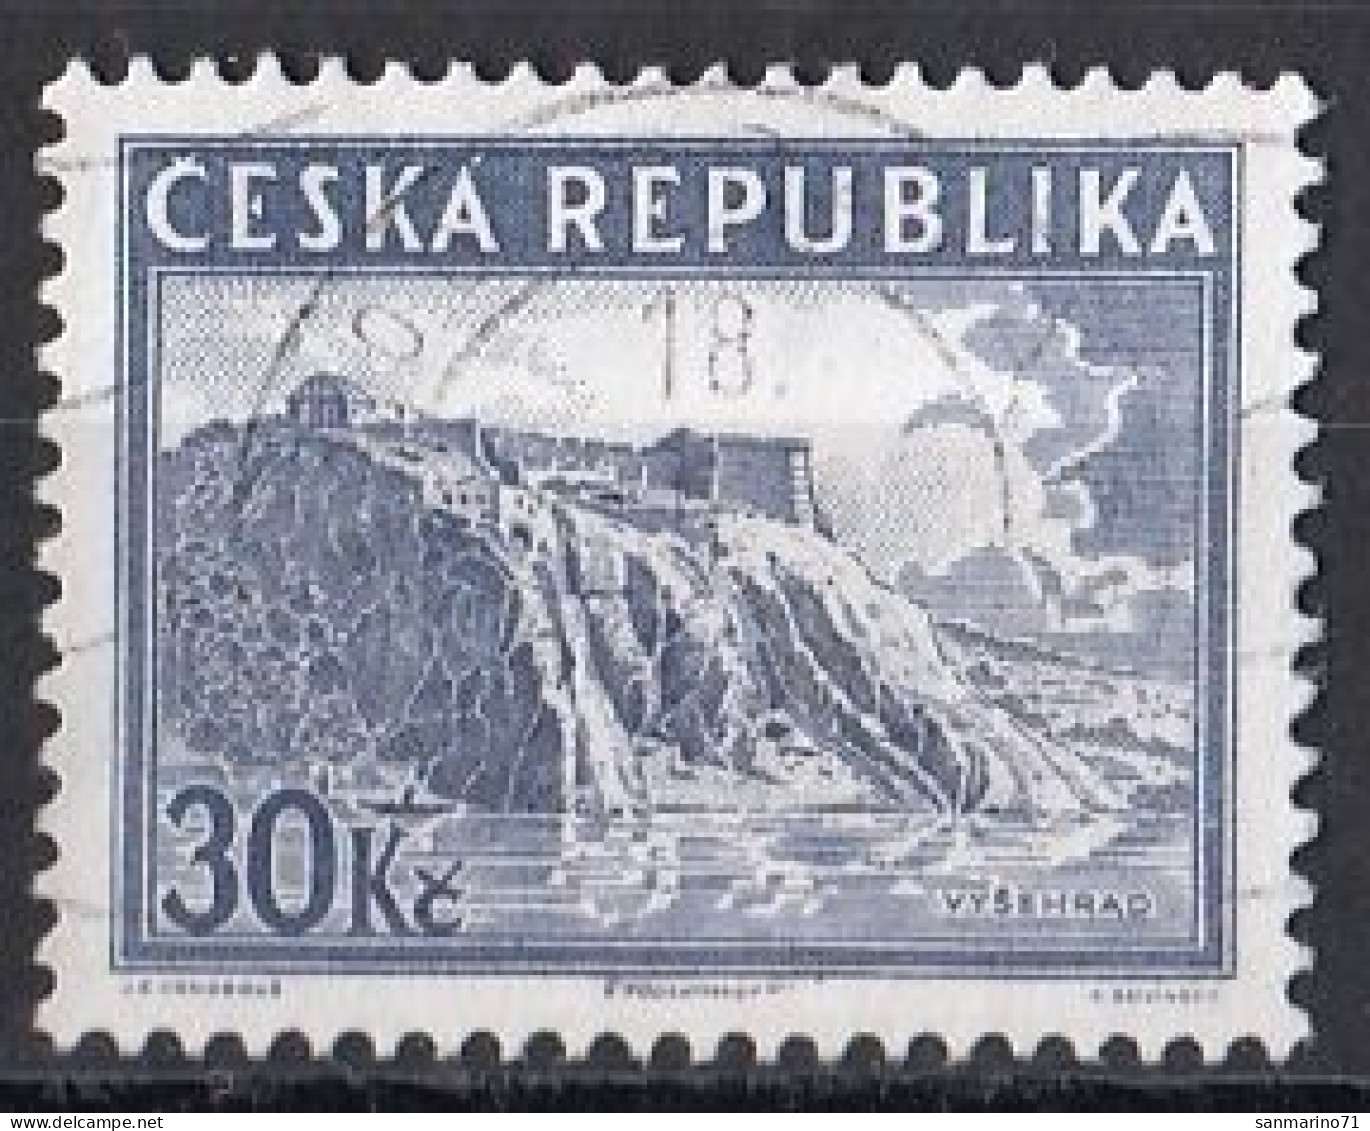 CZECH REPUBLIC 169,used,falc Hinged - Used Stamps